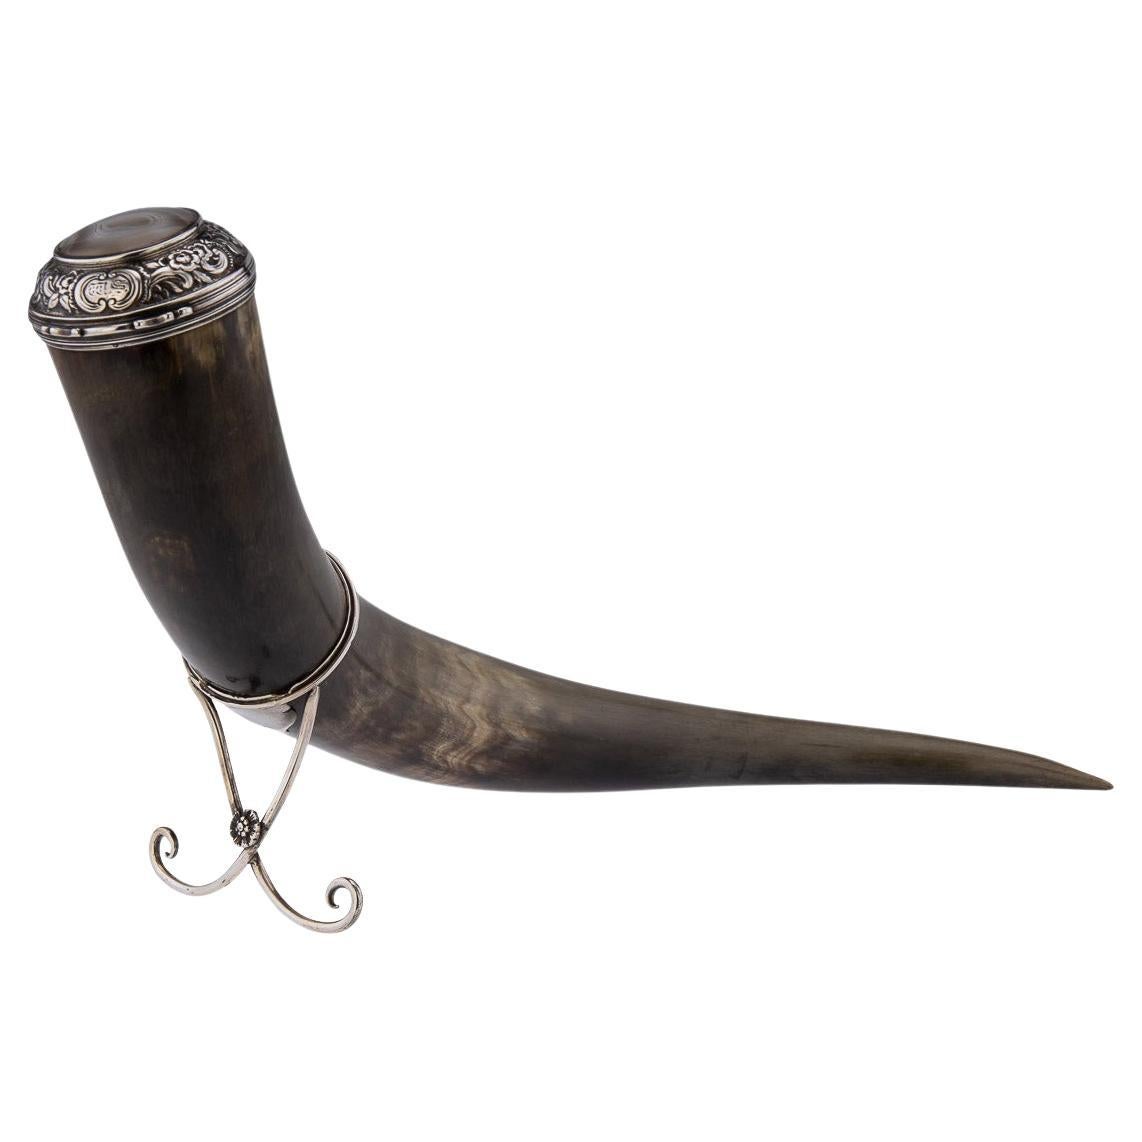 19th Century Scottish Horn, Banded Agate & Solid Silver Table Snuff Mull, c.1870 For Sale